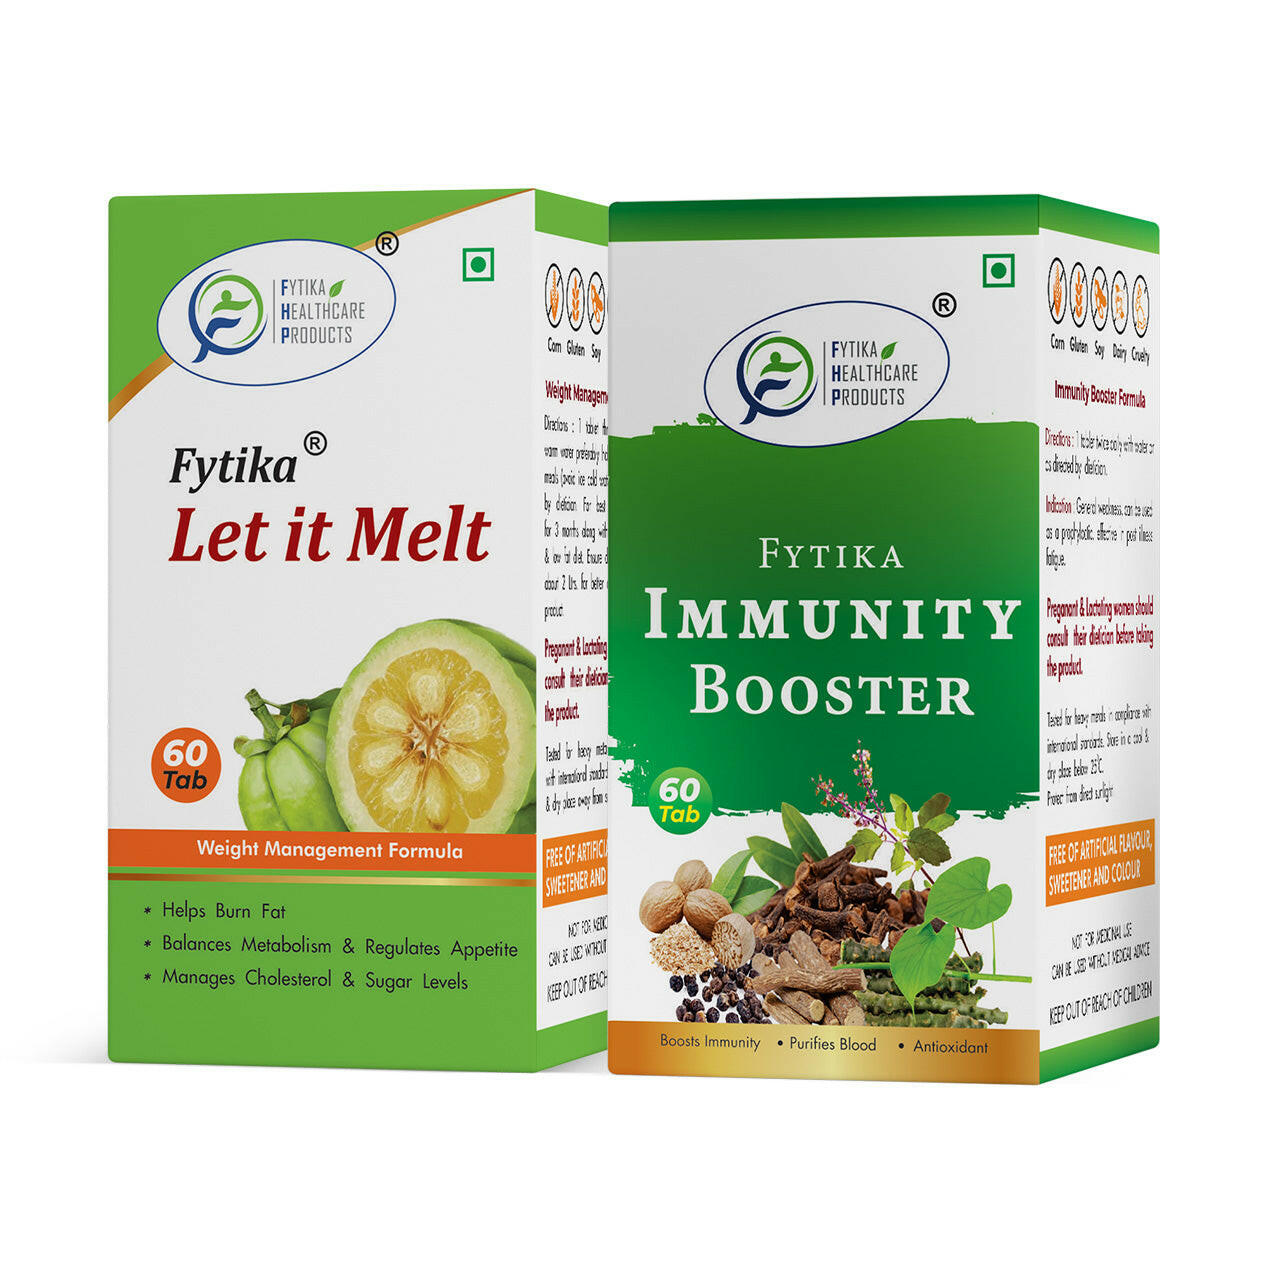 Fytika Let It Melt and Immunity booster: Weight Management, Enhances Immunity, For Men, Women - 60 Tablets Each